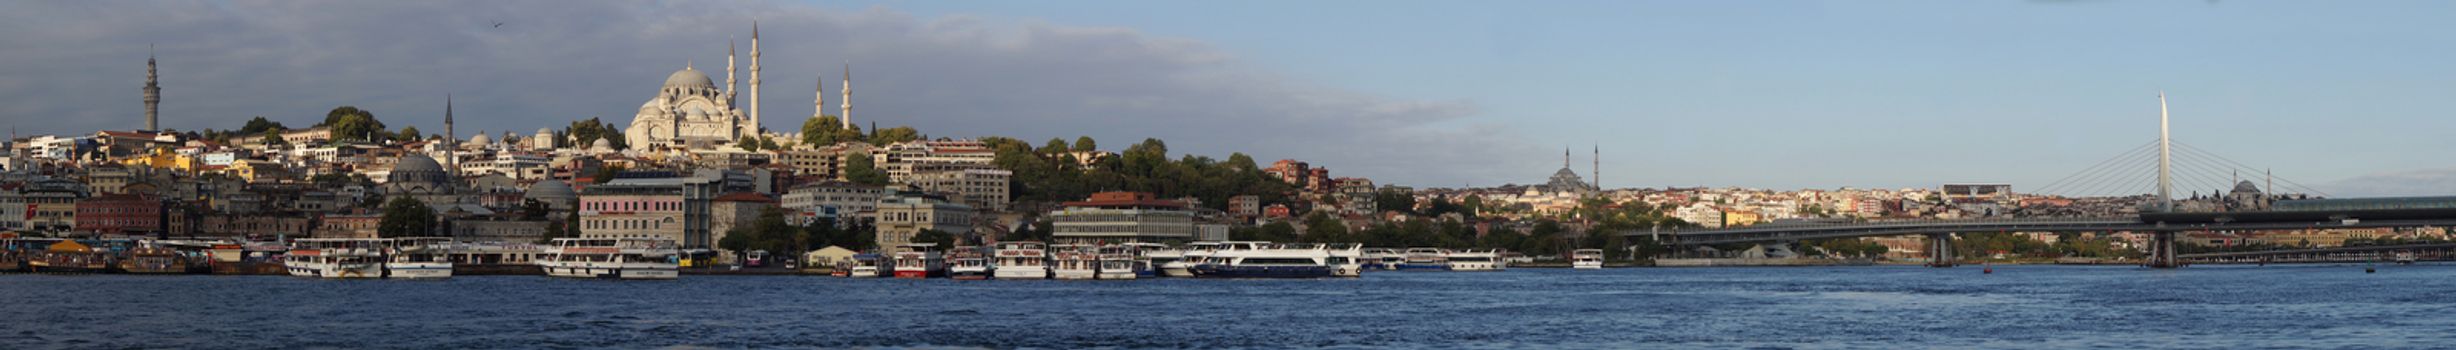 Istanbul - August 30, 2014.  Panorama of Istanbul, the largest city of Turquey, from the Bosforus waterway. On August 2014 in Istanbul, Turkey.